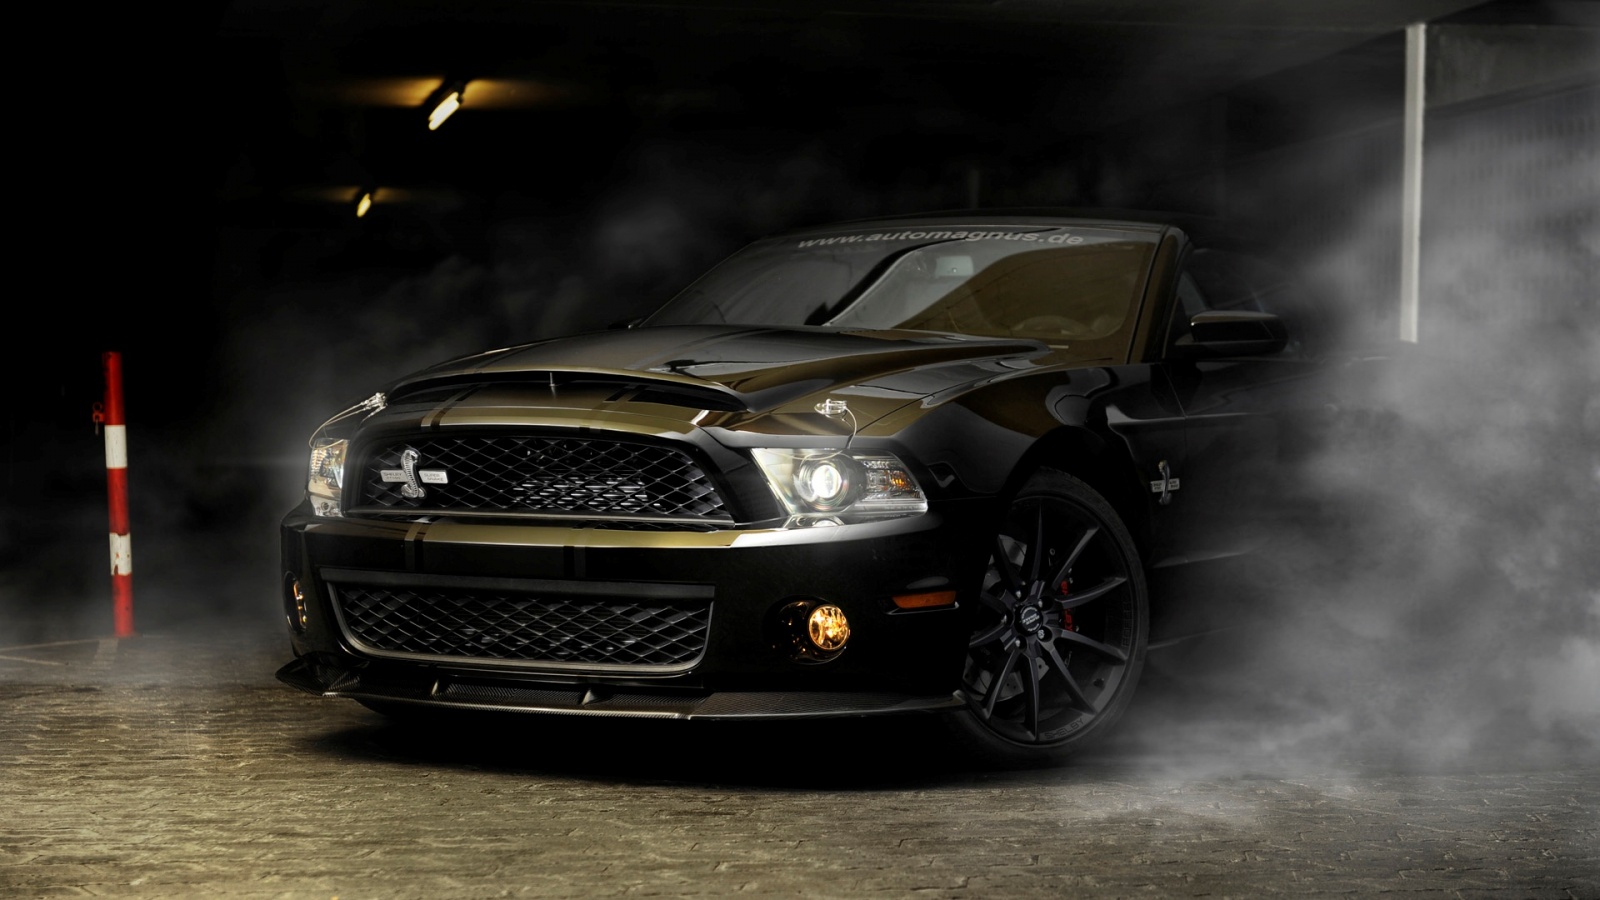 Ford Mustang GT500 Super Snake Shelby